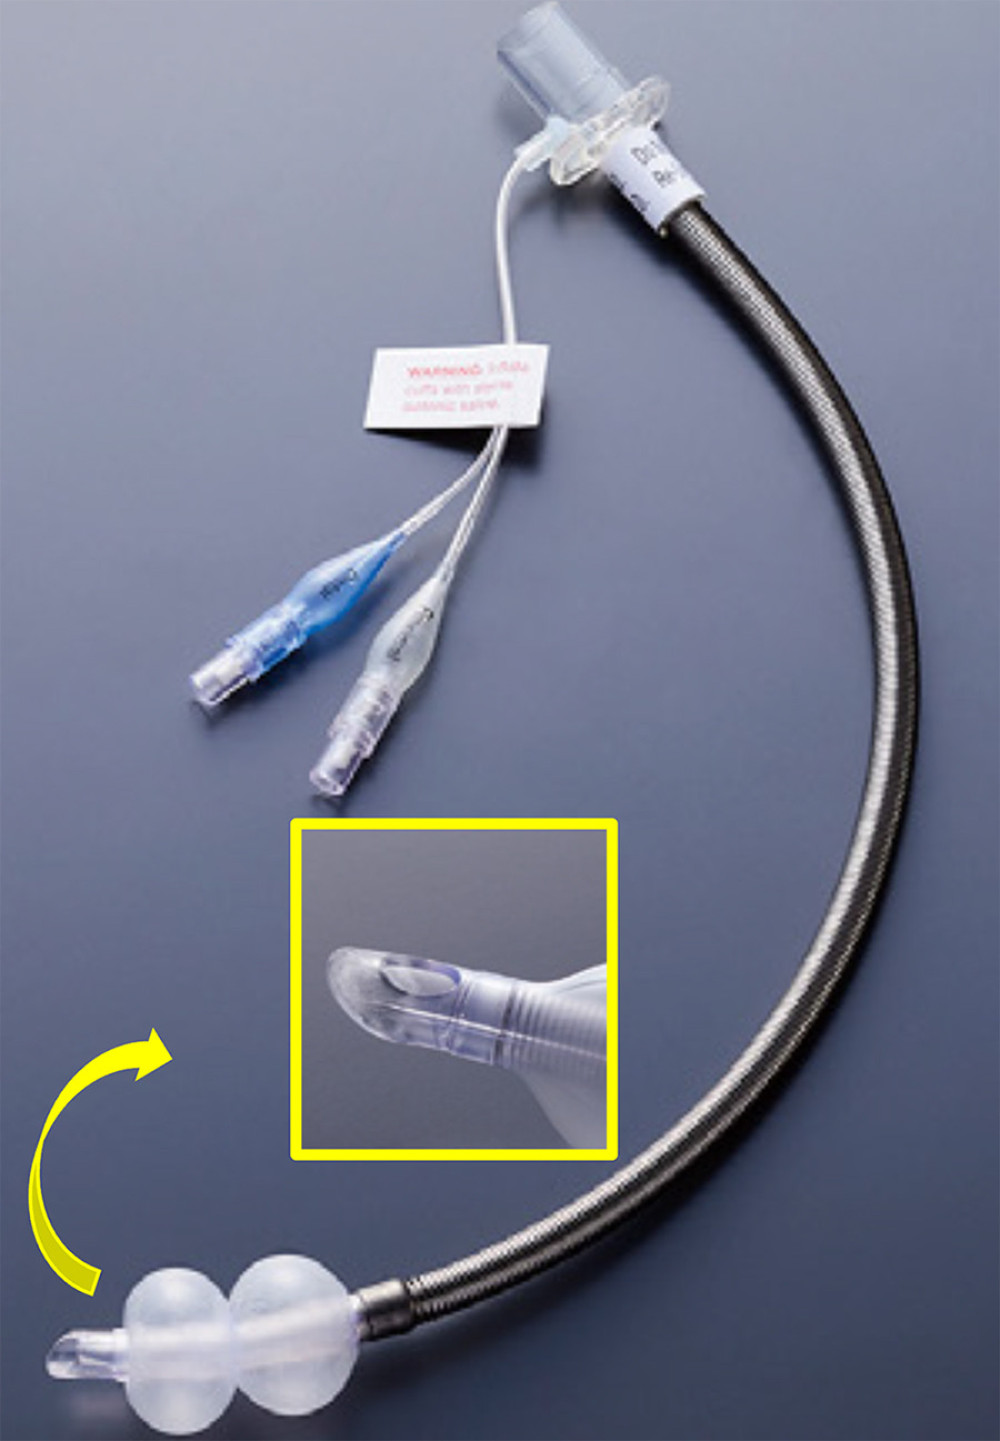 The Laser-Flex tracheal tube has a stainless-steel shaft that is less flexible than standard tracheal tubes. The keen edge of the Murphy eye is placed near the tip of the tube. (Image provided courtesy of Covidien Japan Inc.).